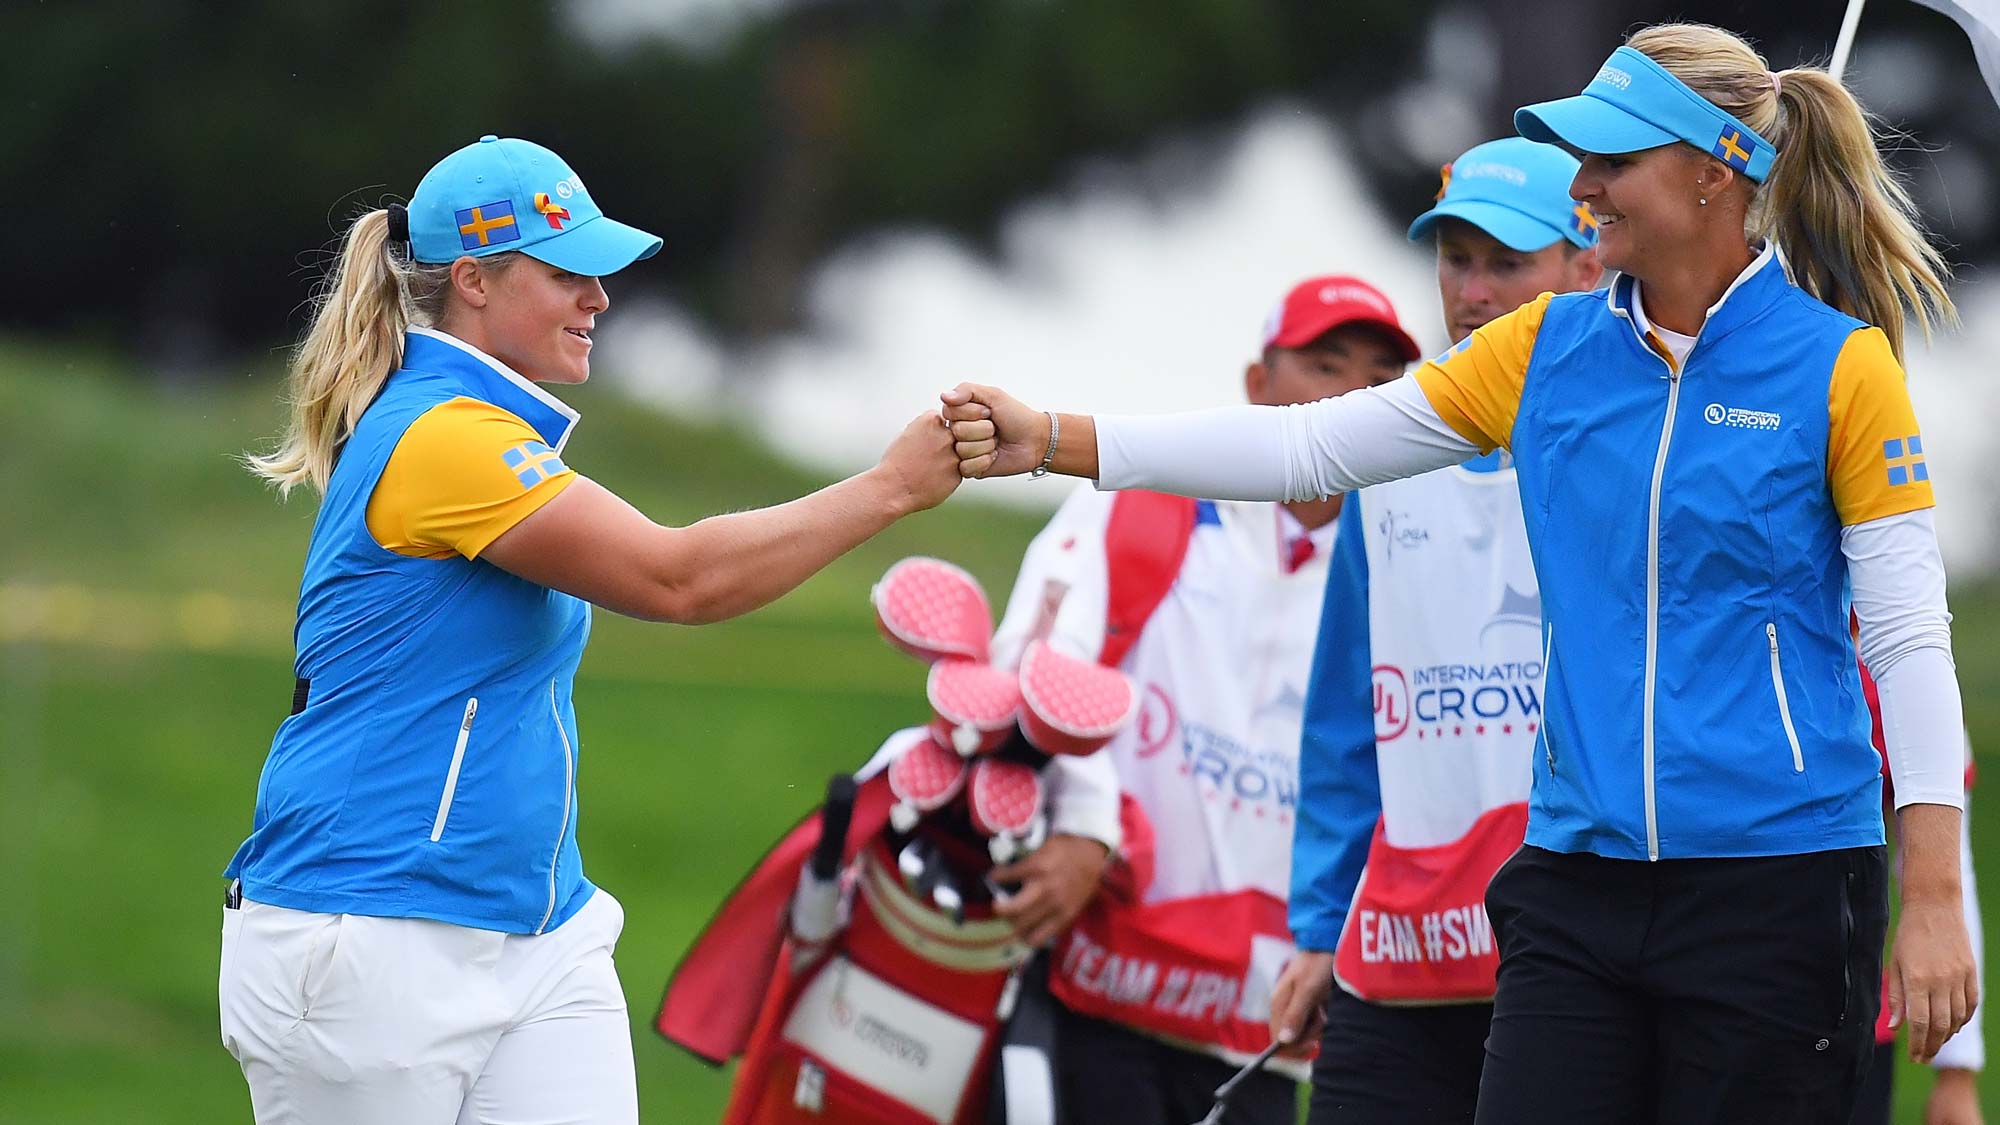 Caroline Hedwall (L) of Sweden celebrates with Anna Nordqvist (R) after her birdie on the 2nd green in the Pool B match between Japan and Sweden on day two of the UL International Crown